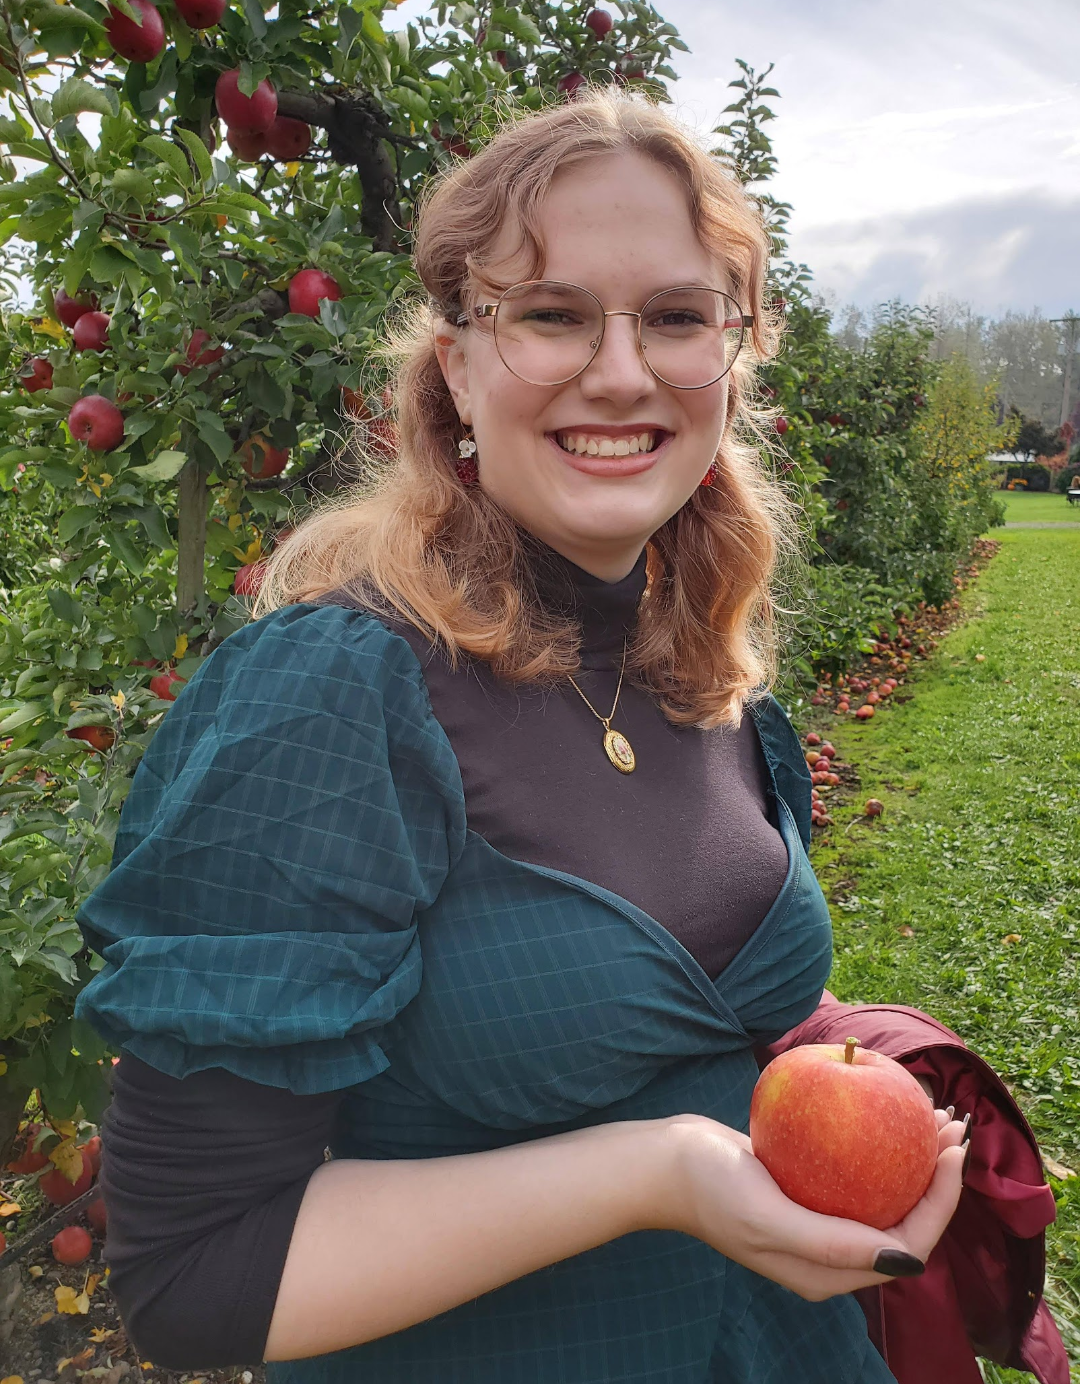 Audrey smiling wearing glasses and a blue/green dress and purple shirt, holding an apple